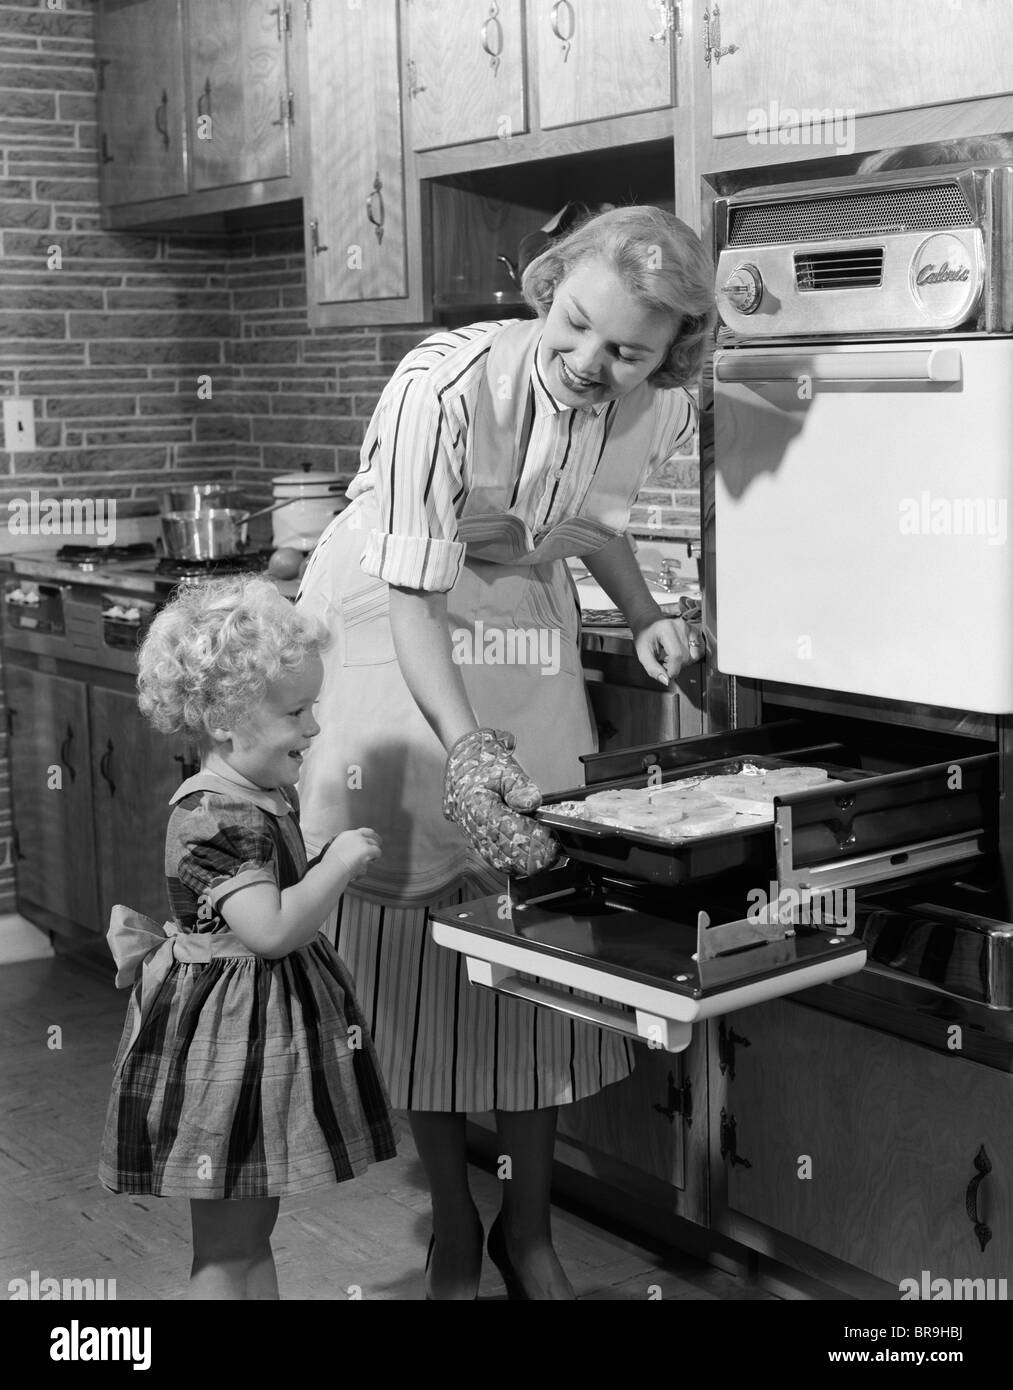 1950s SMILING MOTHER DAUGHTER IN KITCHEN BROILING PORK CHOPS Stock Photo